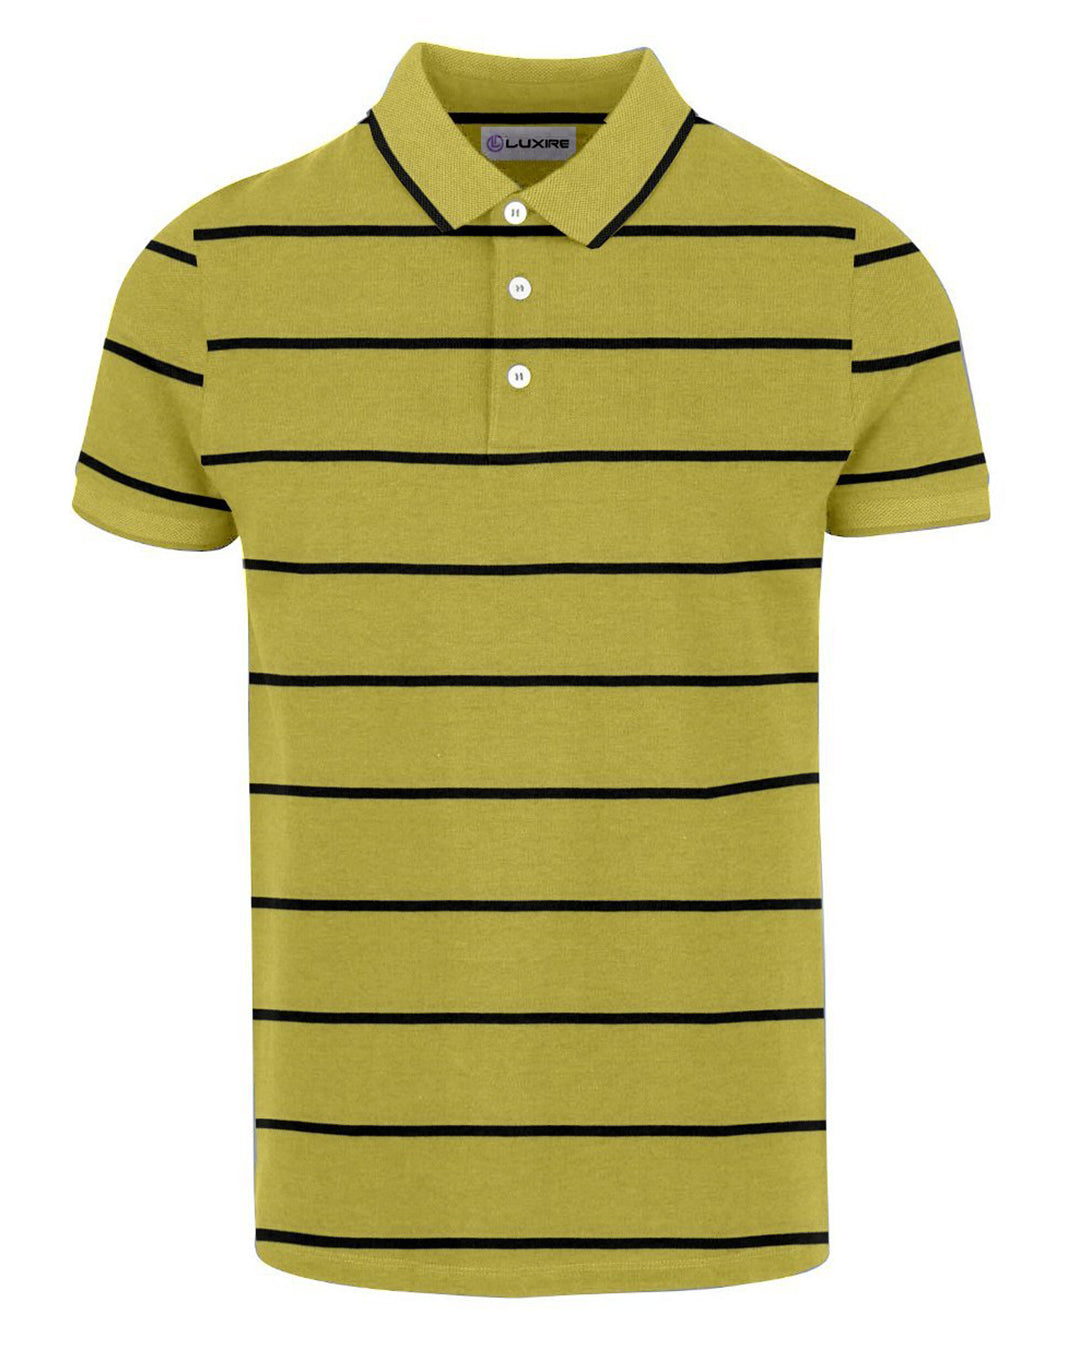 Front of the custom oxford polo shirt for men by Luxire in yellow with black stripes